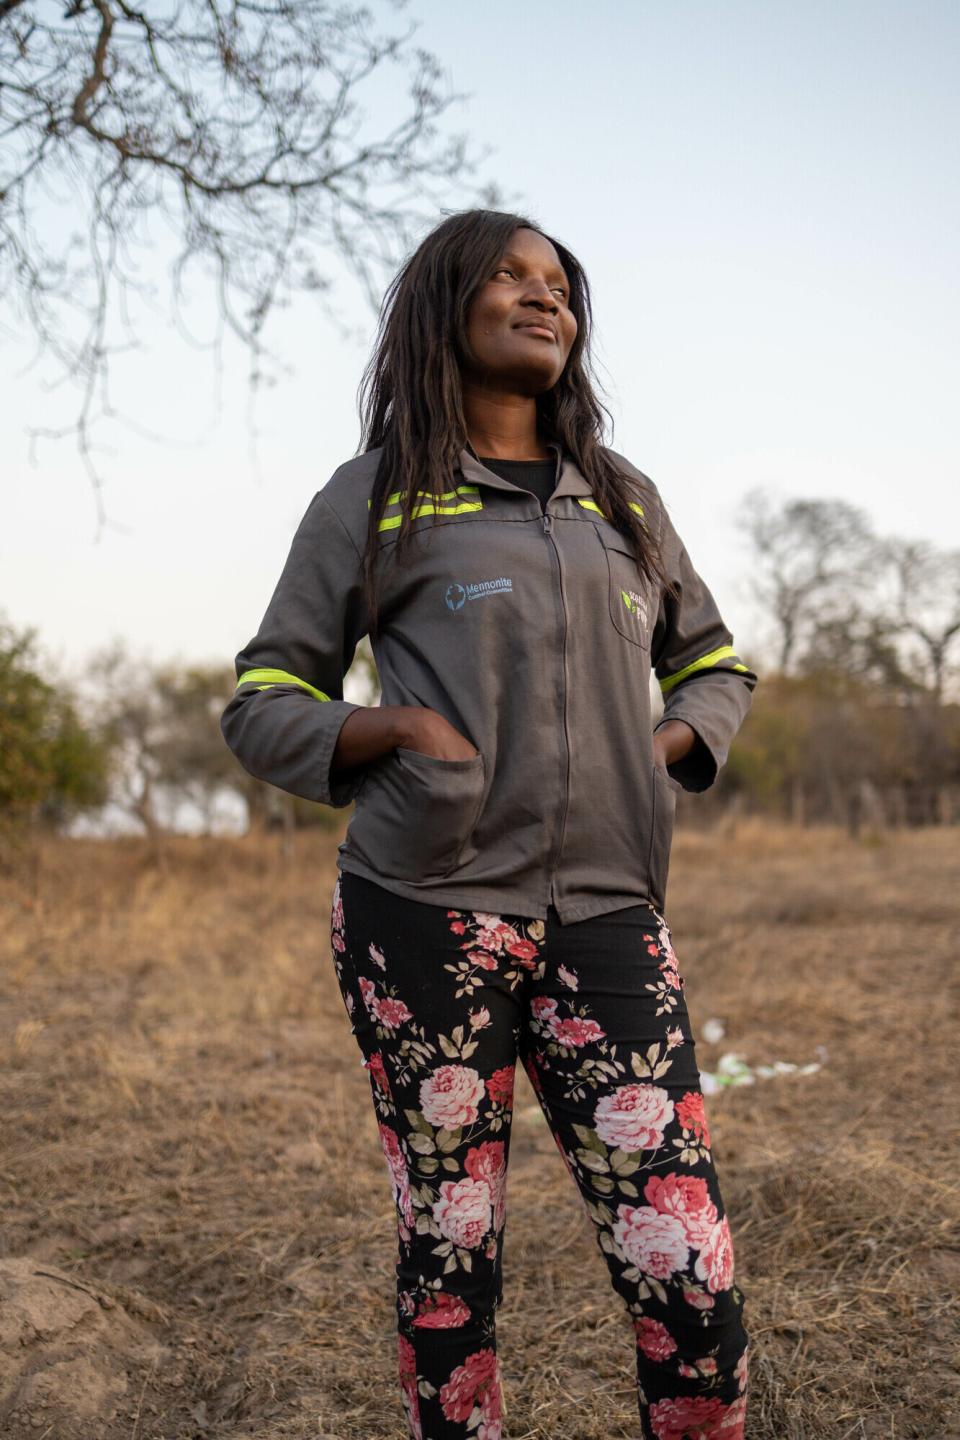 A Zimbabwe woman stands with her hands in her pockets, looking off into the distance